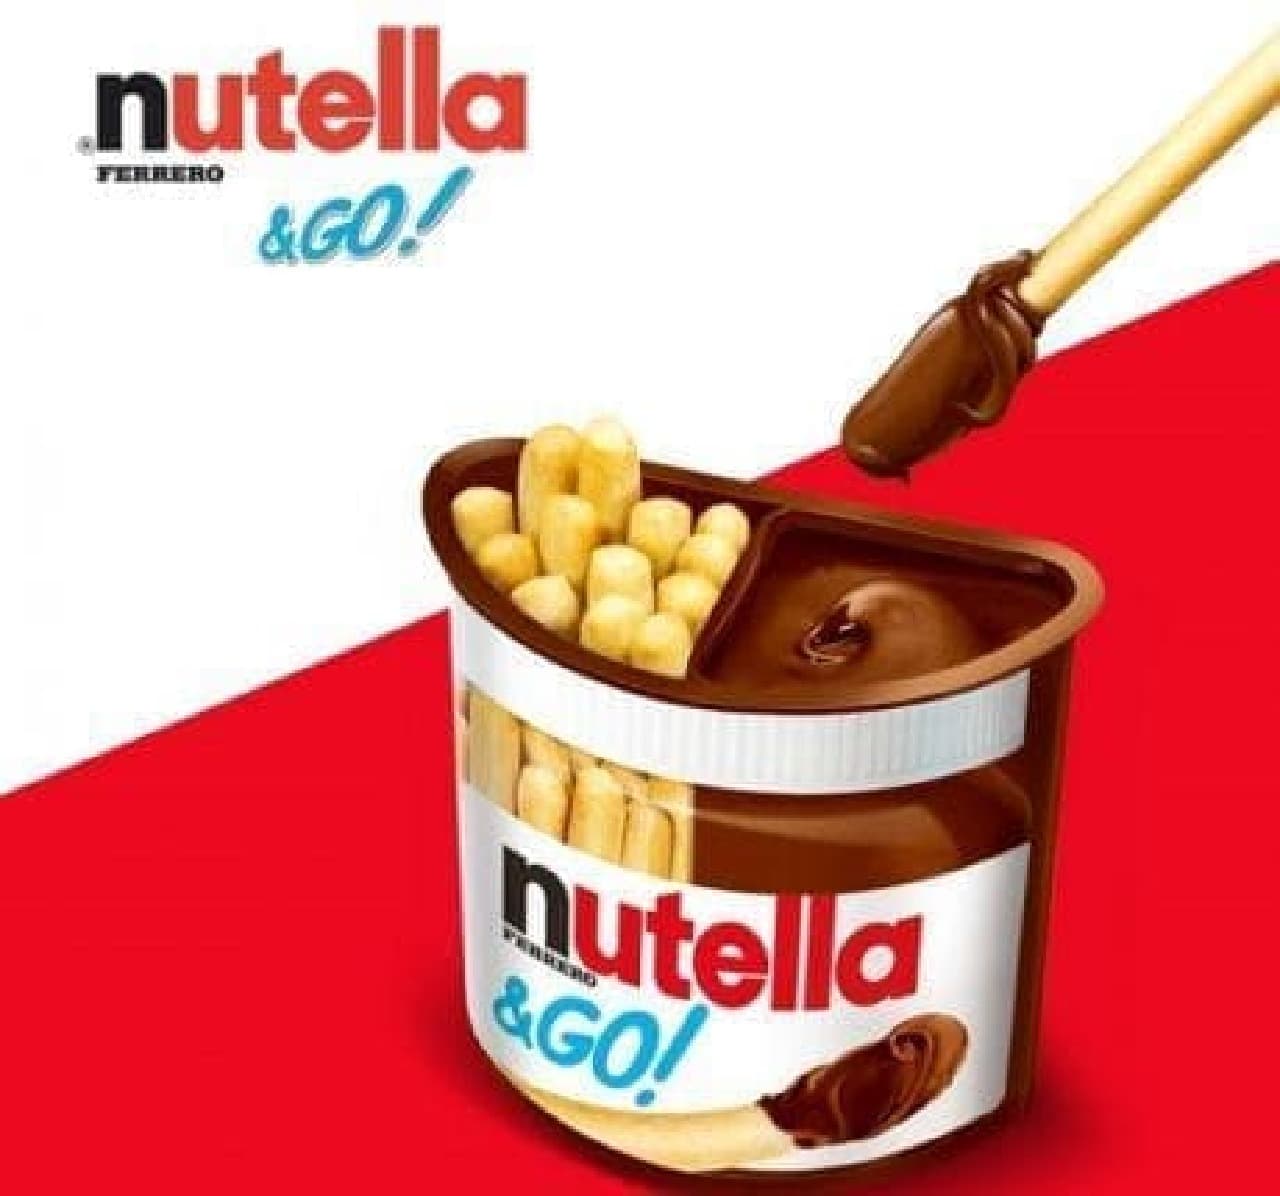 Nutella and Go!